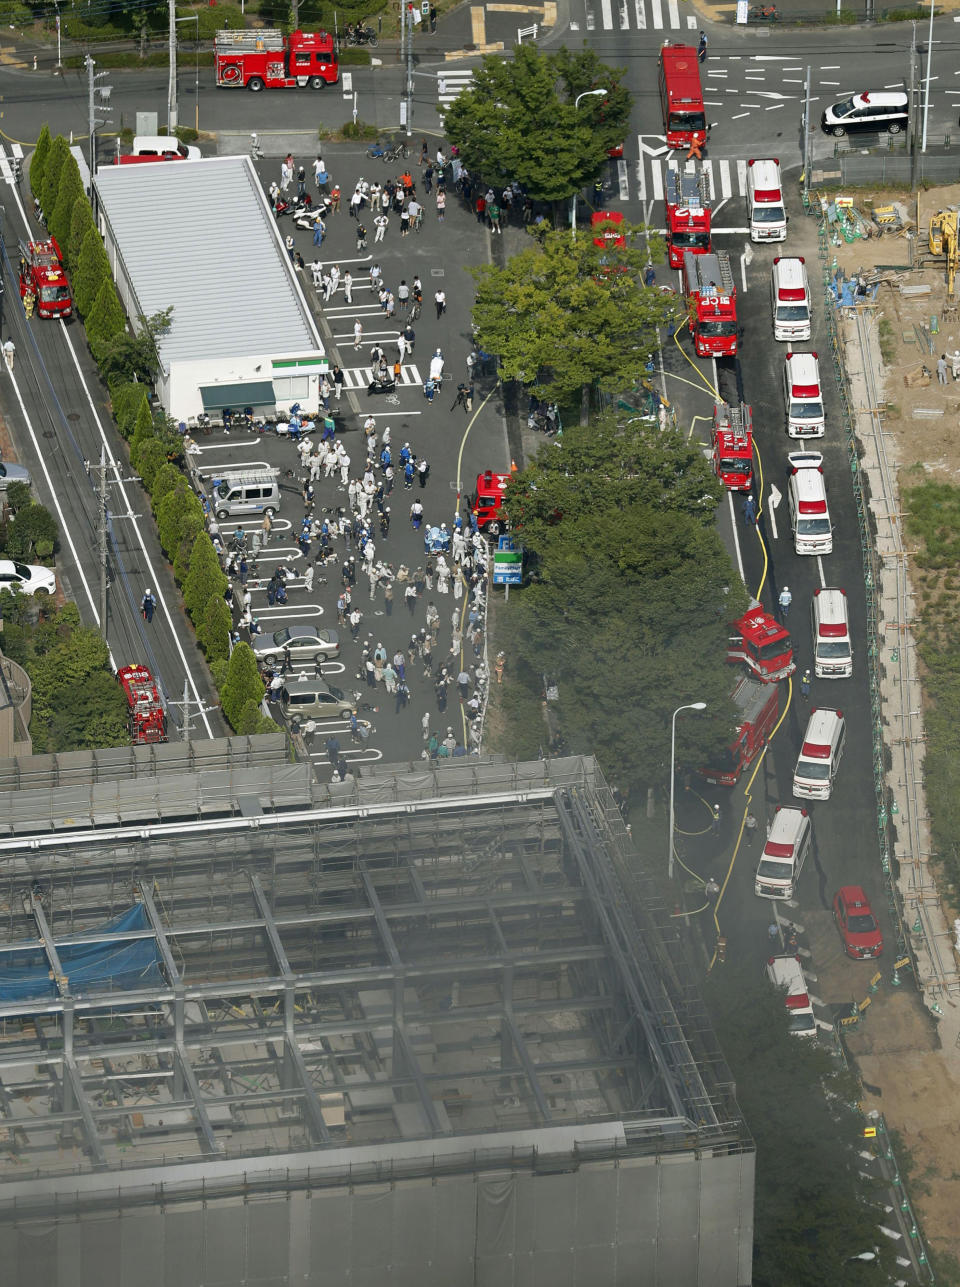 Fire trucks and ambulances line up near the site of a fire in Tama city, Tokyo's western suburbs, Thursday, July 26, 2018. The fire broke out Thursday afternoon, injuring a number of people at the building. (Kyodo News via AP)